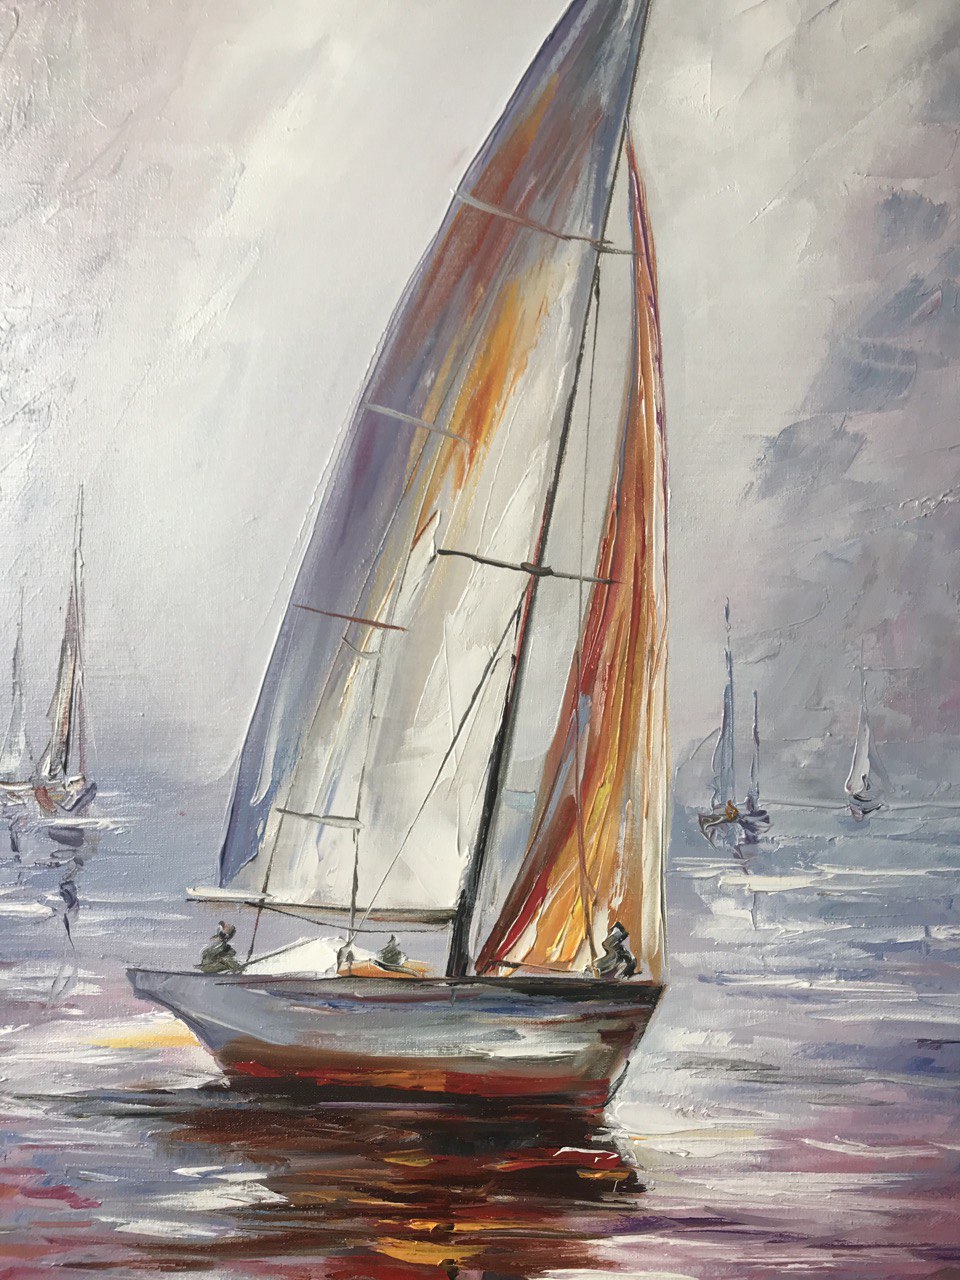 Sail Boat Painting Sunset Oil Painting Original Sea boat Art Decor Harbor Painting Framed Ship Wall Art Canvas Boat Yacht Oil Painting